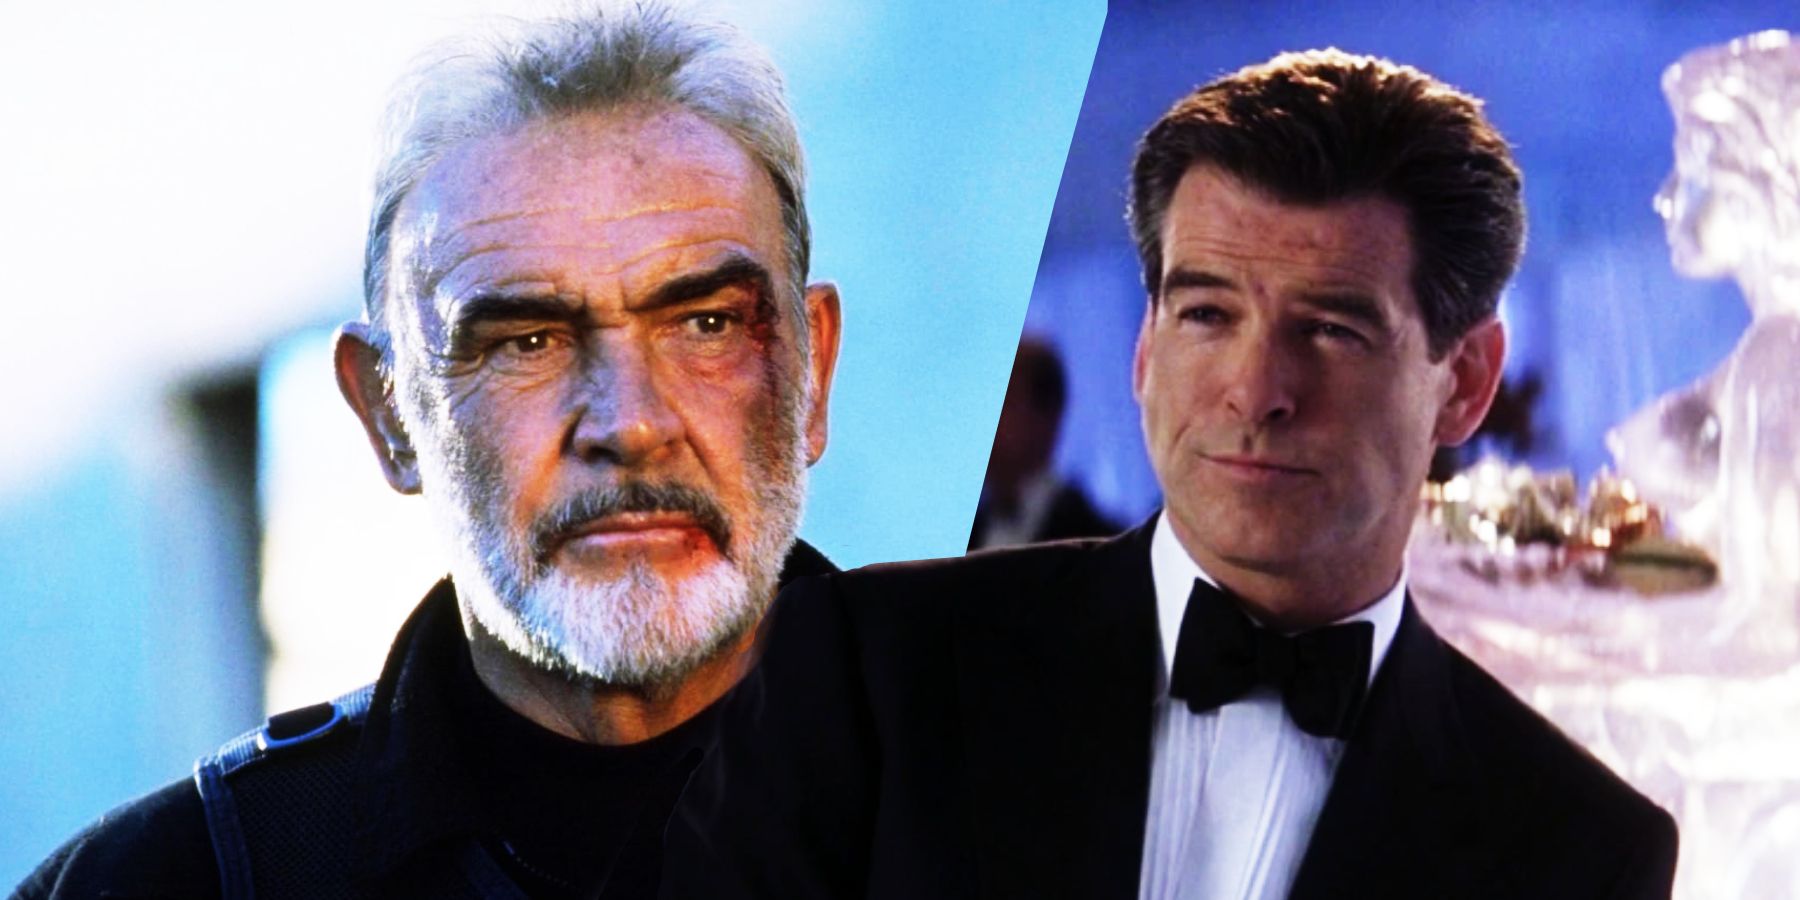 Sean Connery's Bond in Die Another Day